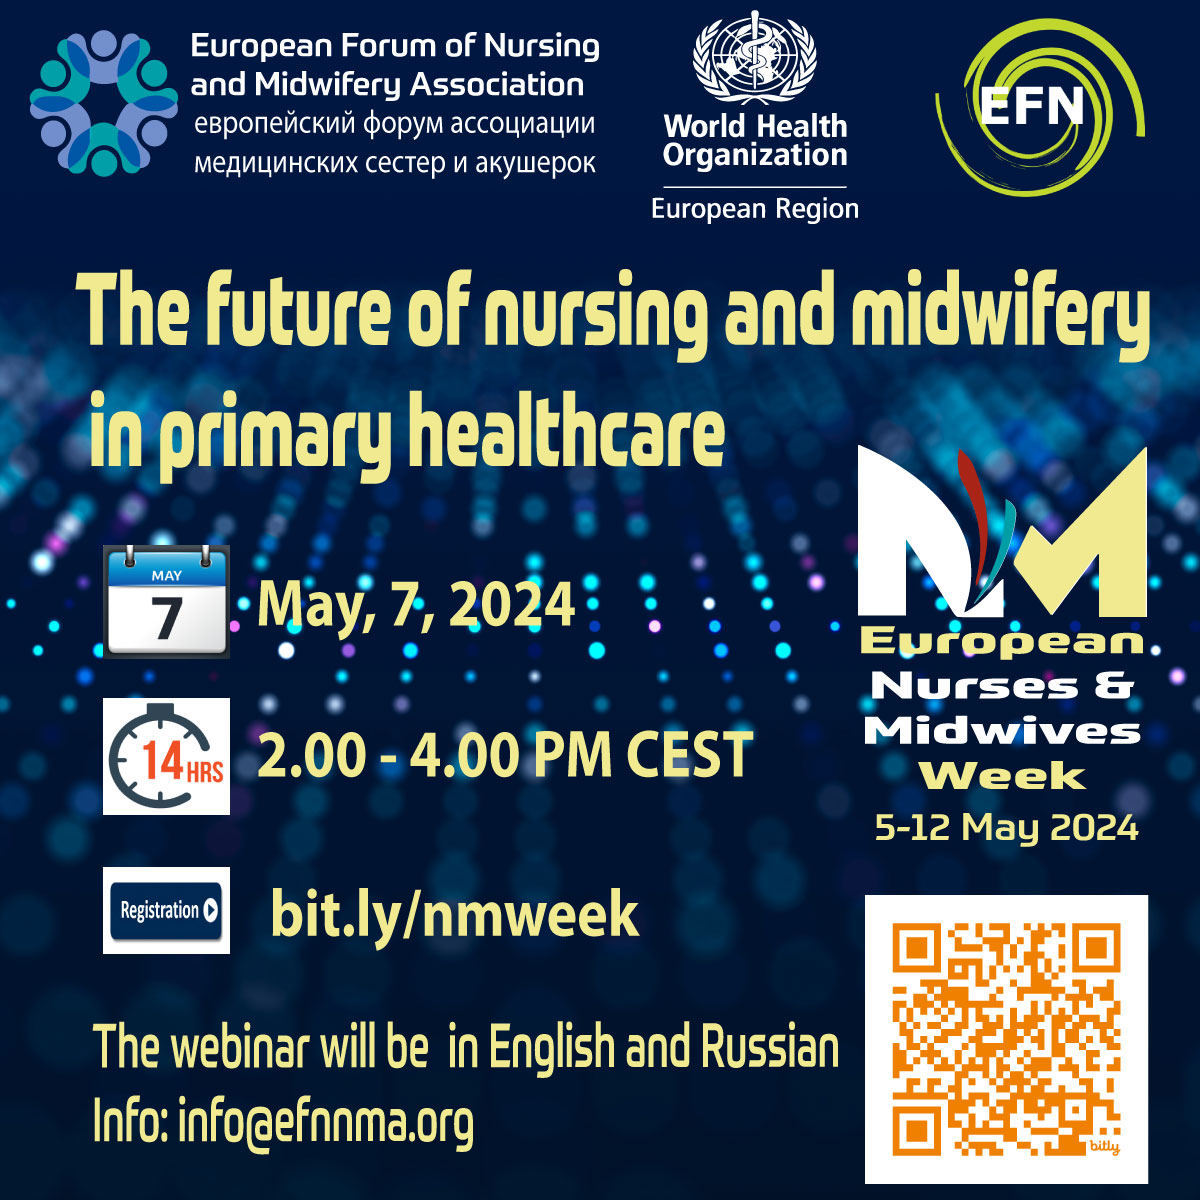 📢 Exciting News! 🌟 Join us for the 'Future of Nursing and Midwifery in Primary Health Care' webinar on May 7th, 2024! 🎉 #European #Nursing #Midwifery #Weekend 📝 Register here: bit.ly/nmweek 👩‍⚕️👨‍⚕️ This insightful webinar will focus on the evolving landscape of…